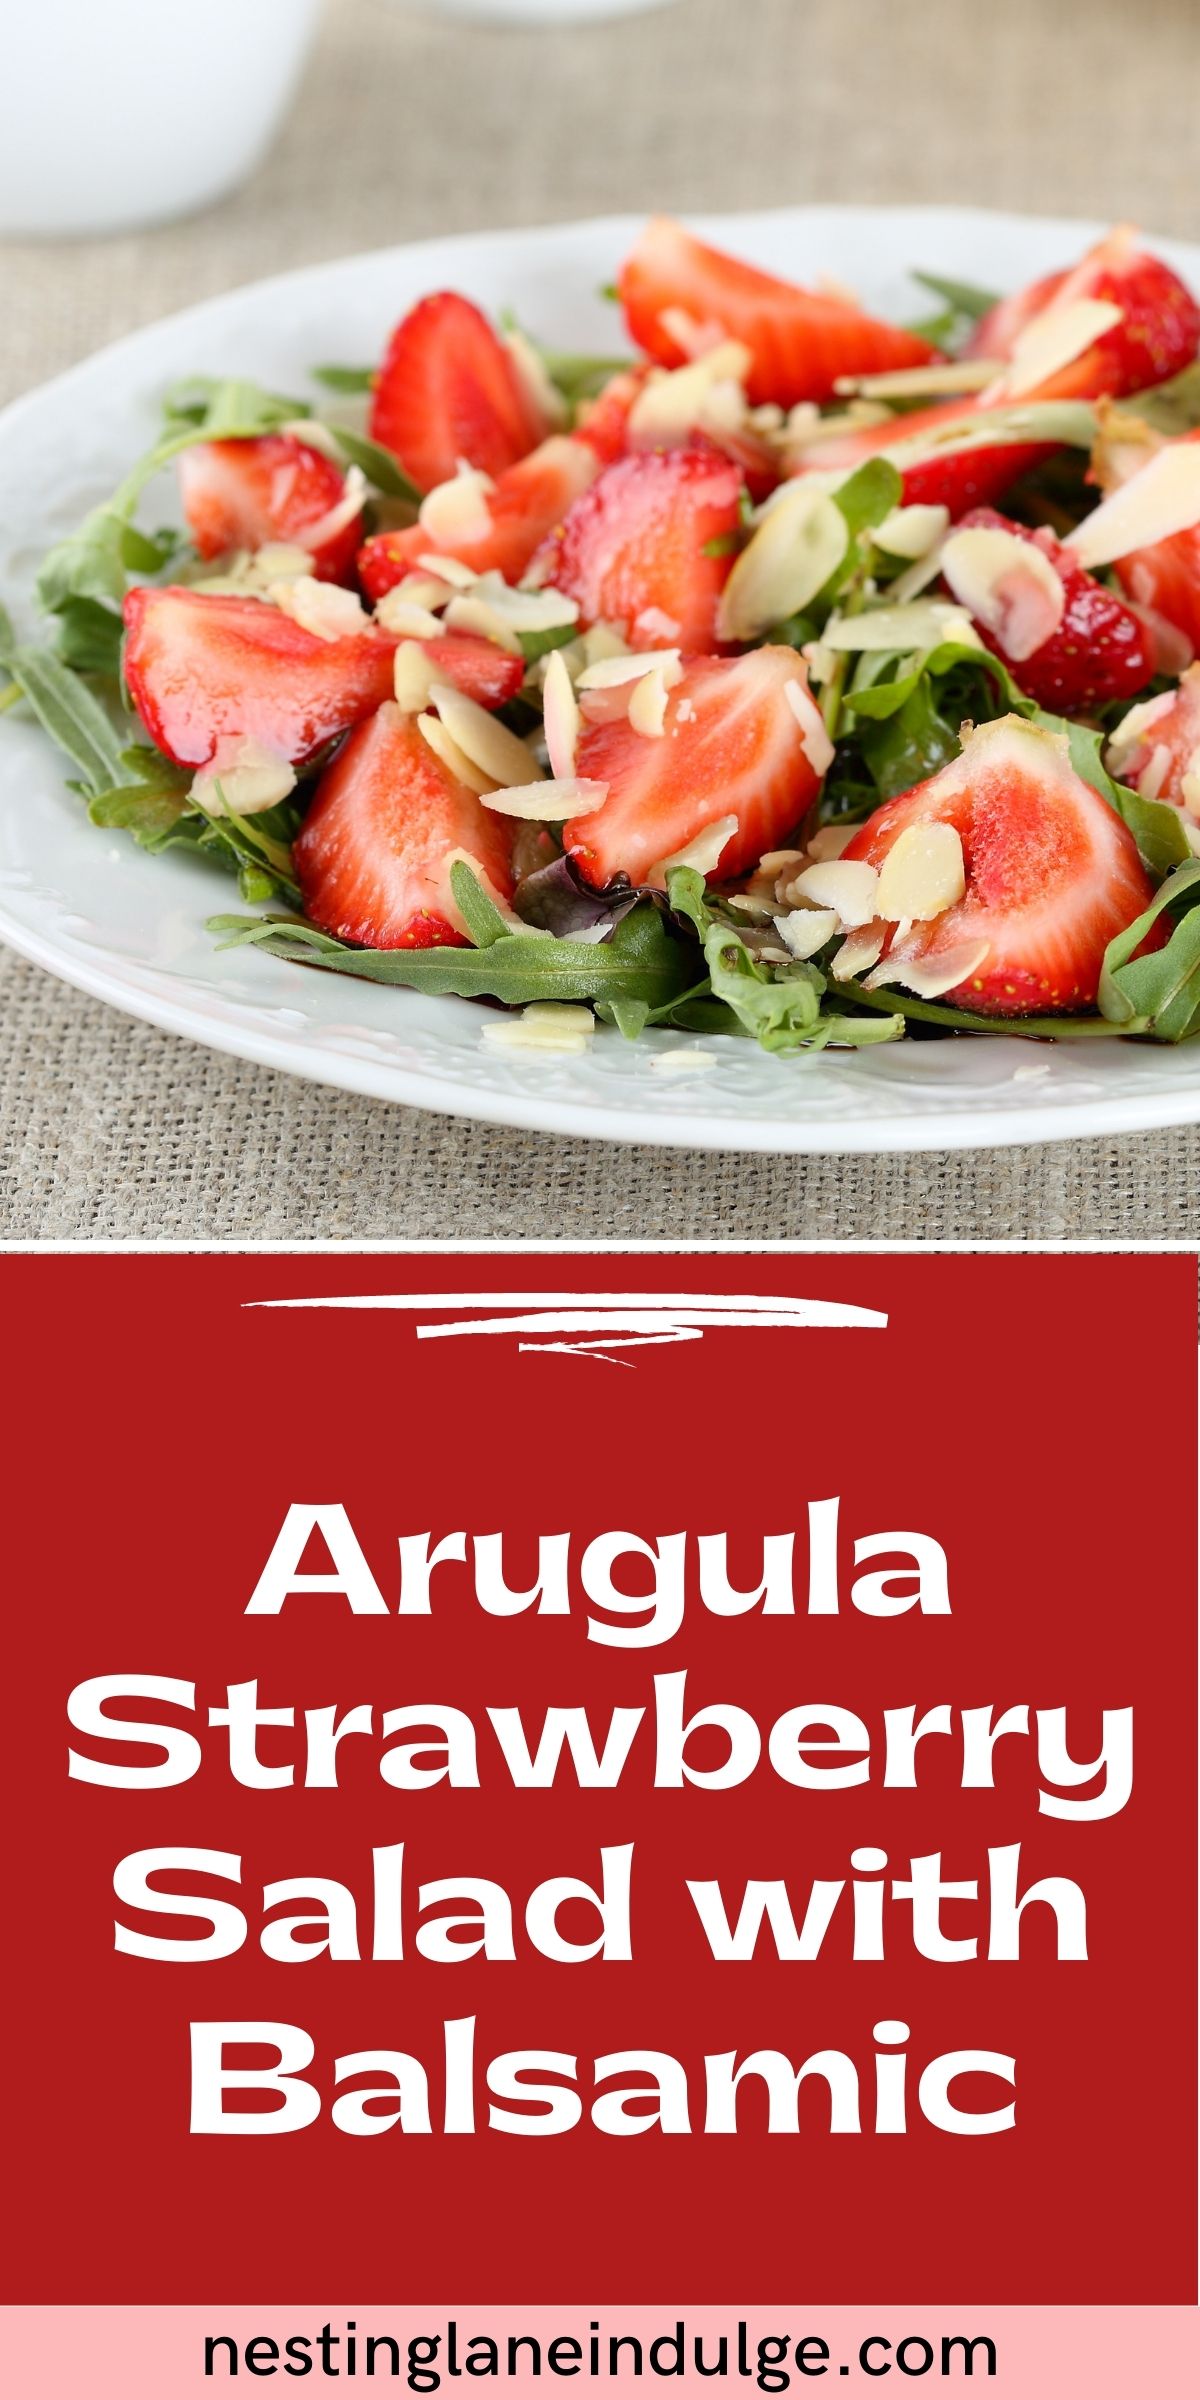 Graphic for Pinterest of Arugula Strawberry Salad with Balsamic Recipe.